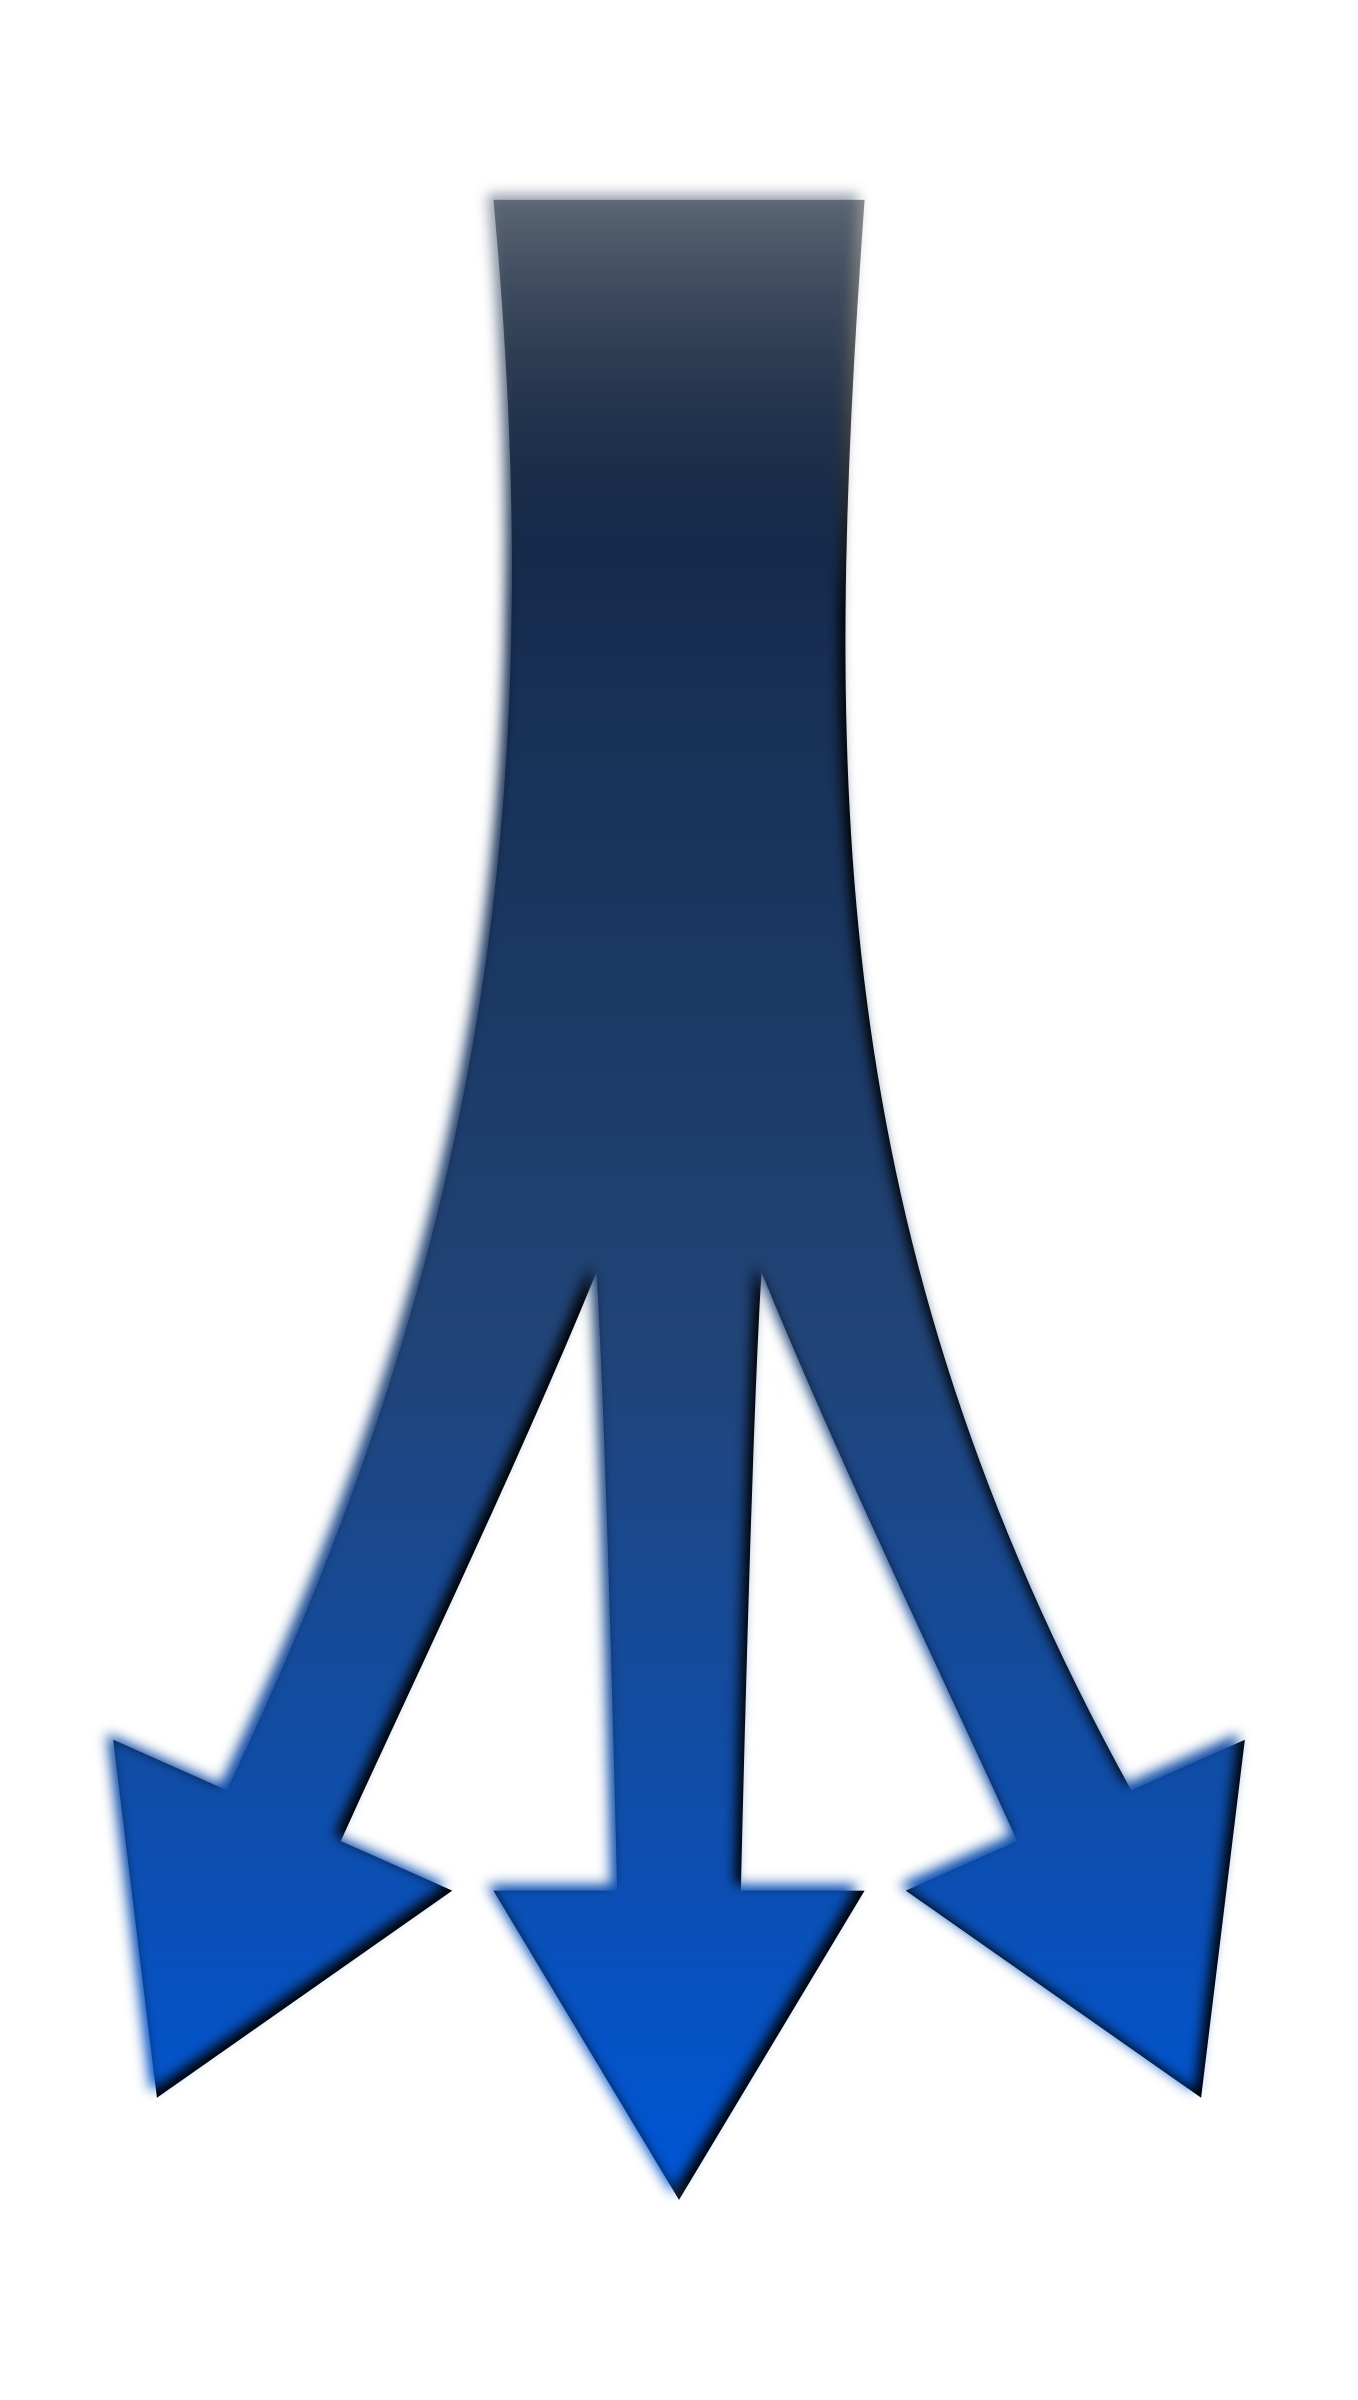 To arrows big image. One clipart blue